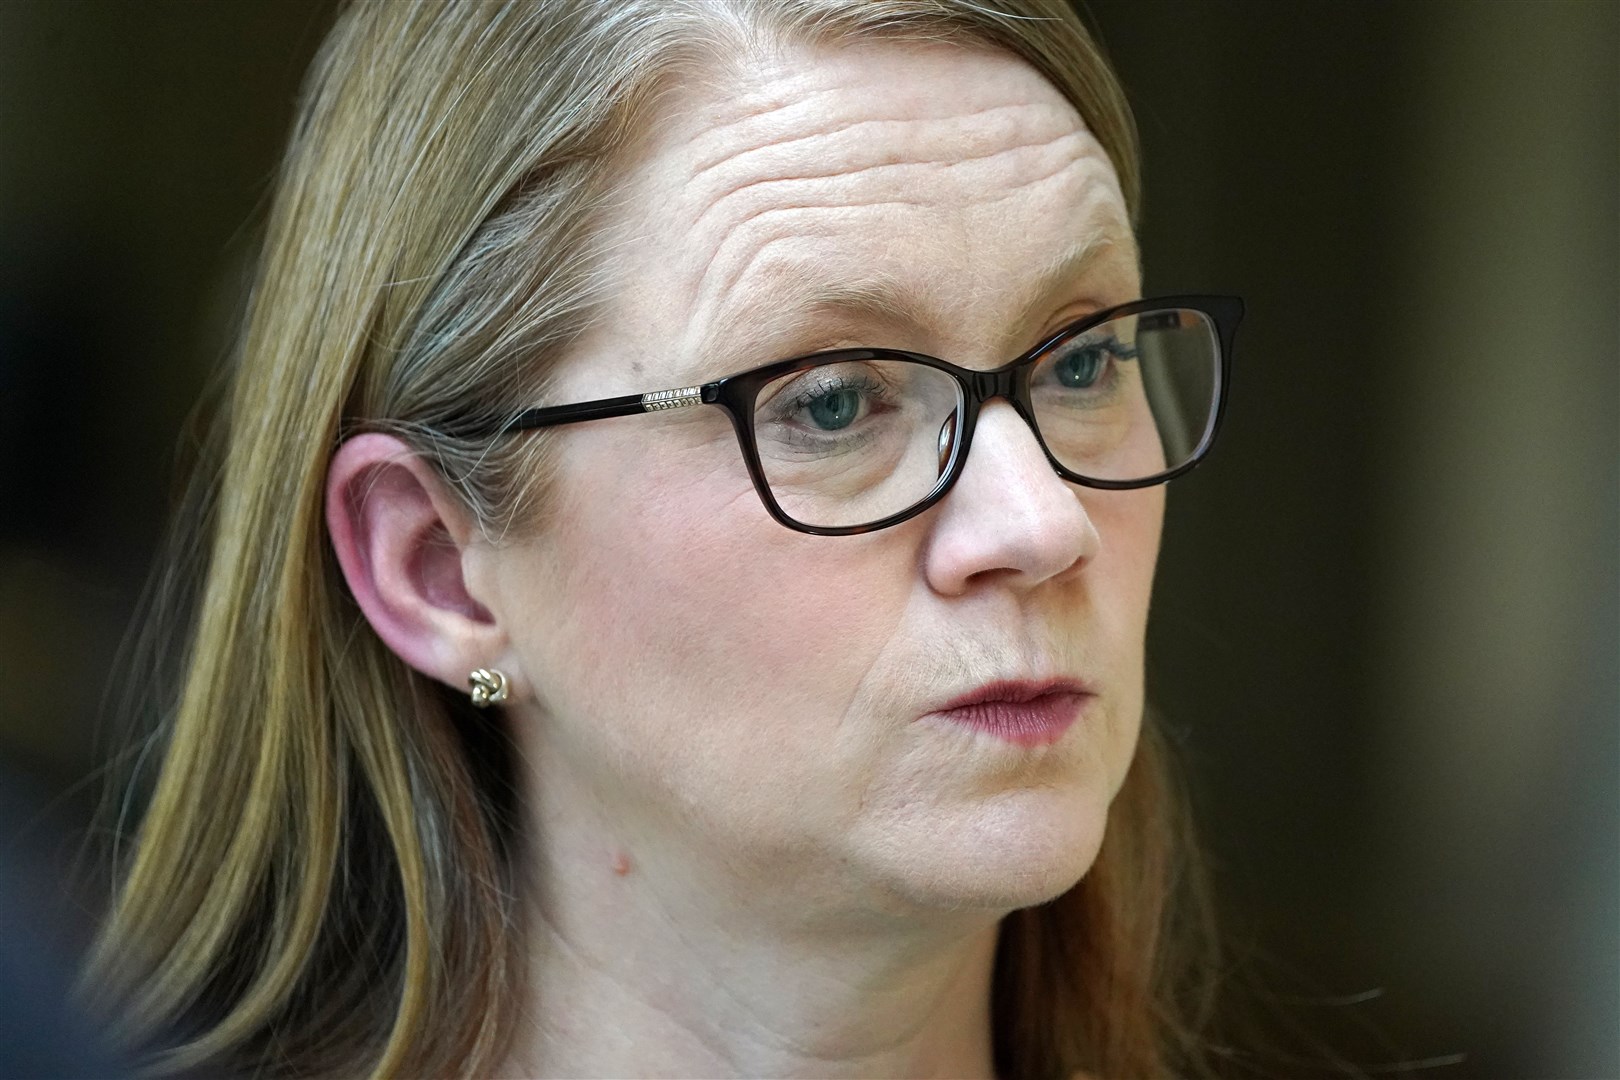 Shirley-Anne Somerville said the Scottish Government along with local councils and teaching unions were still ‘some way apart’ (Andrew Milligan/PA)